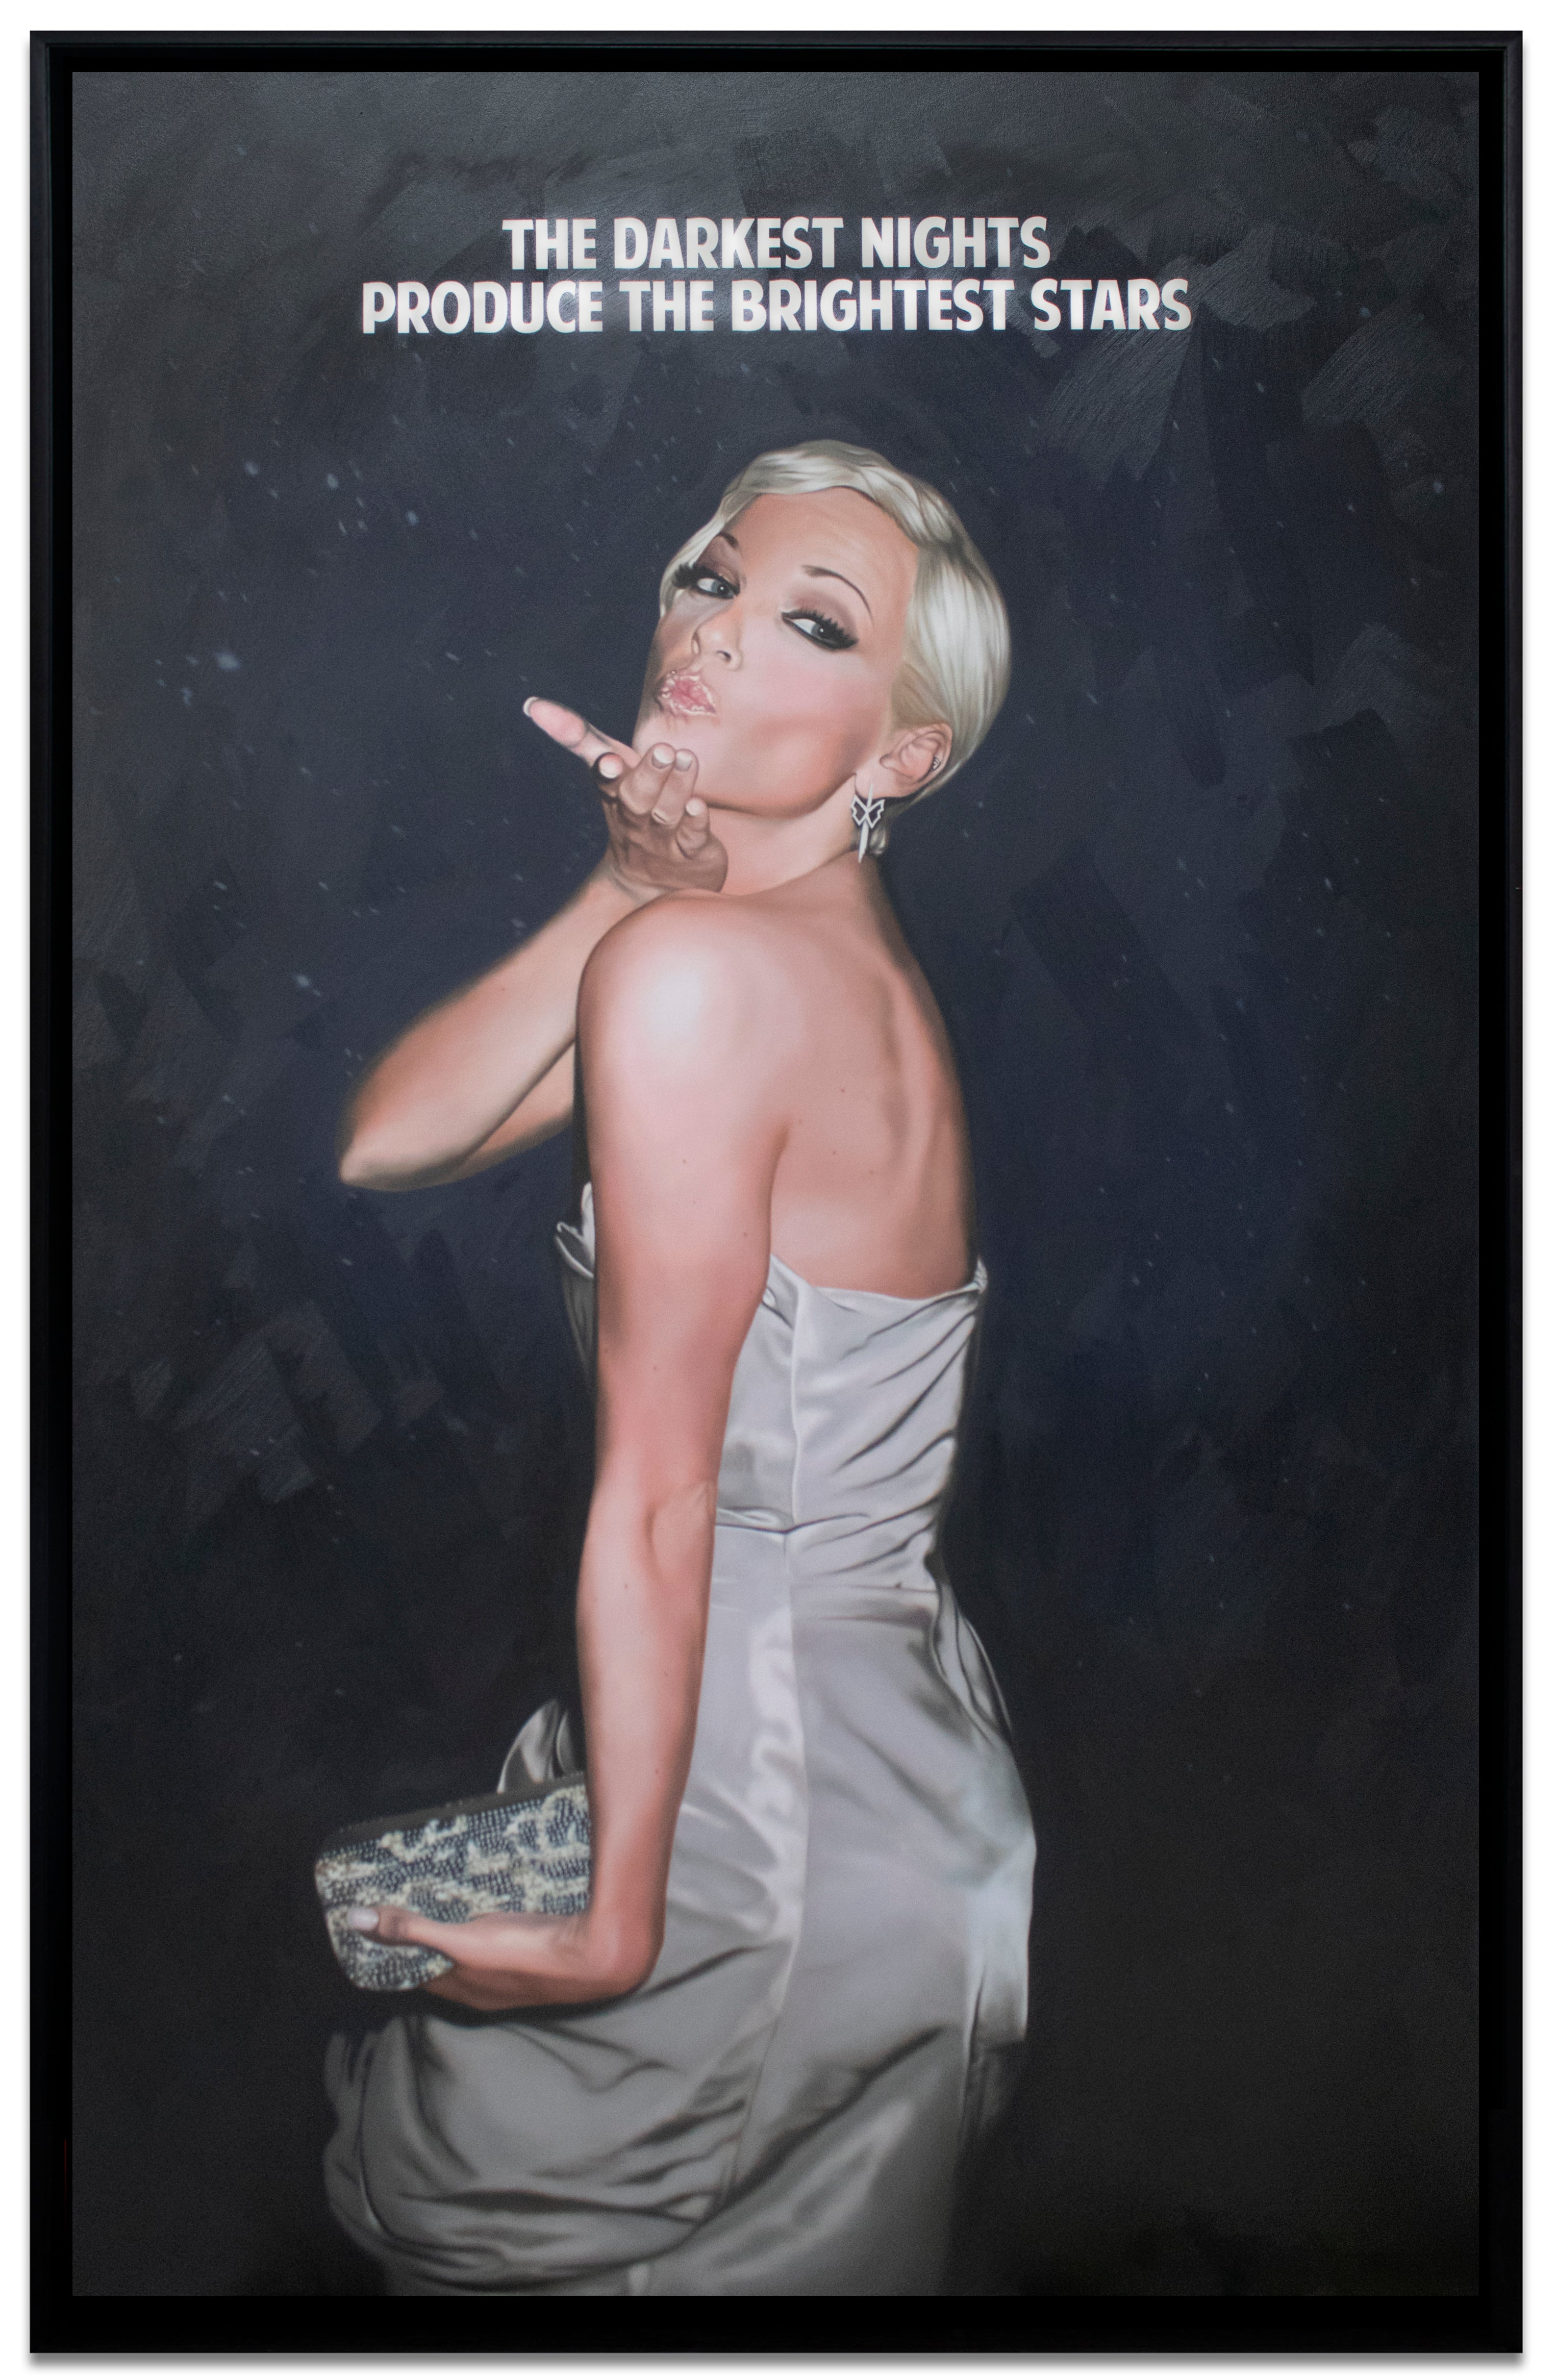 The Connor Brothers original Sarah Harding print to be auctioned off